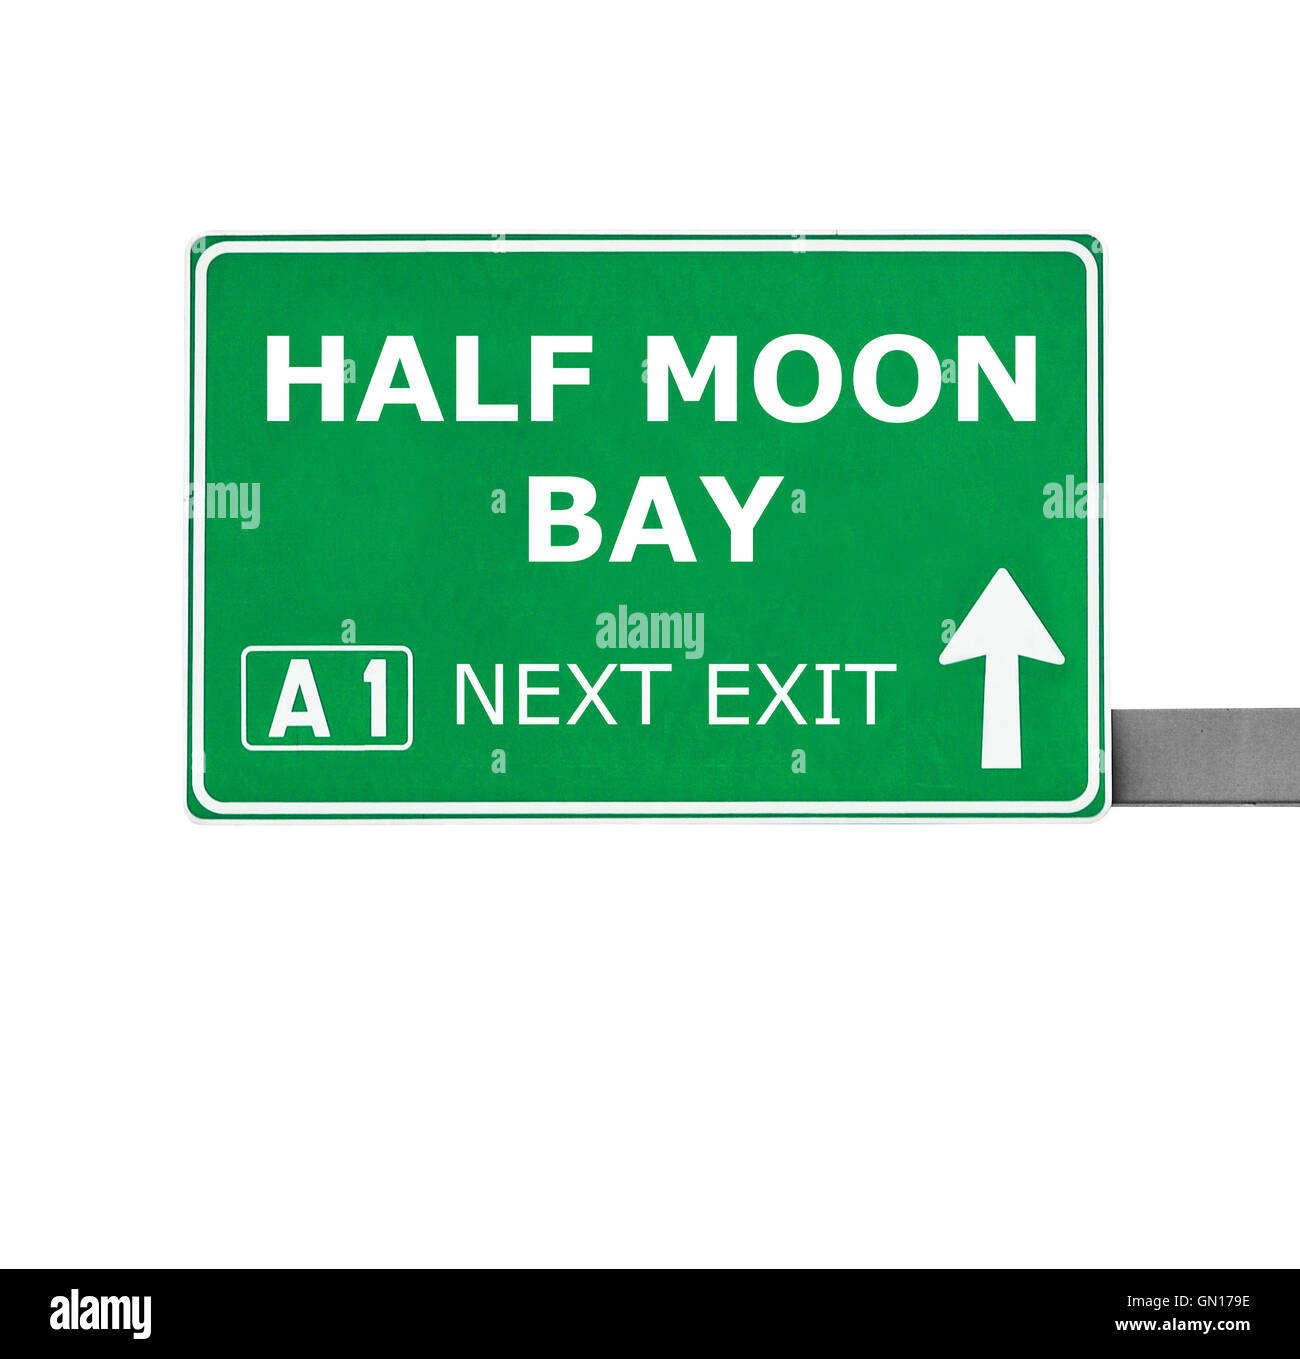 HALF MOON BAY road sign isolated on white Stock Photo